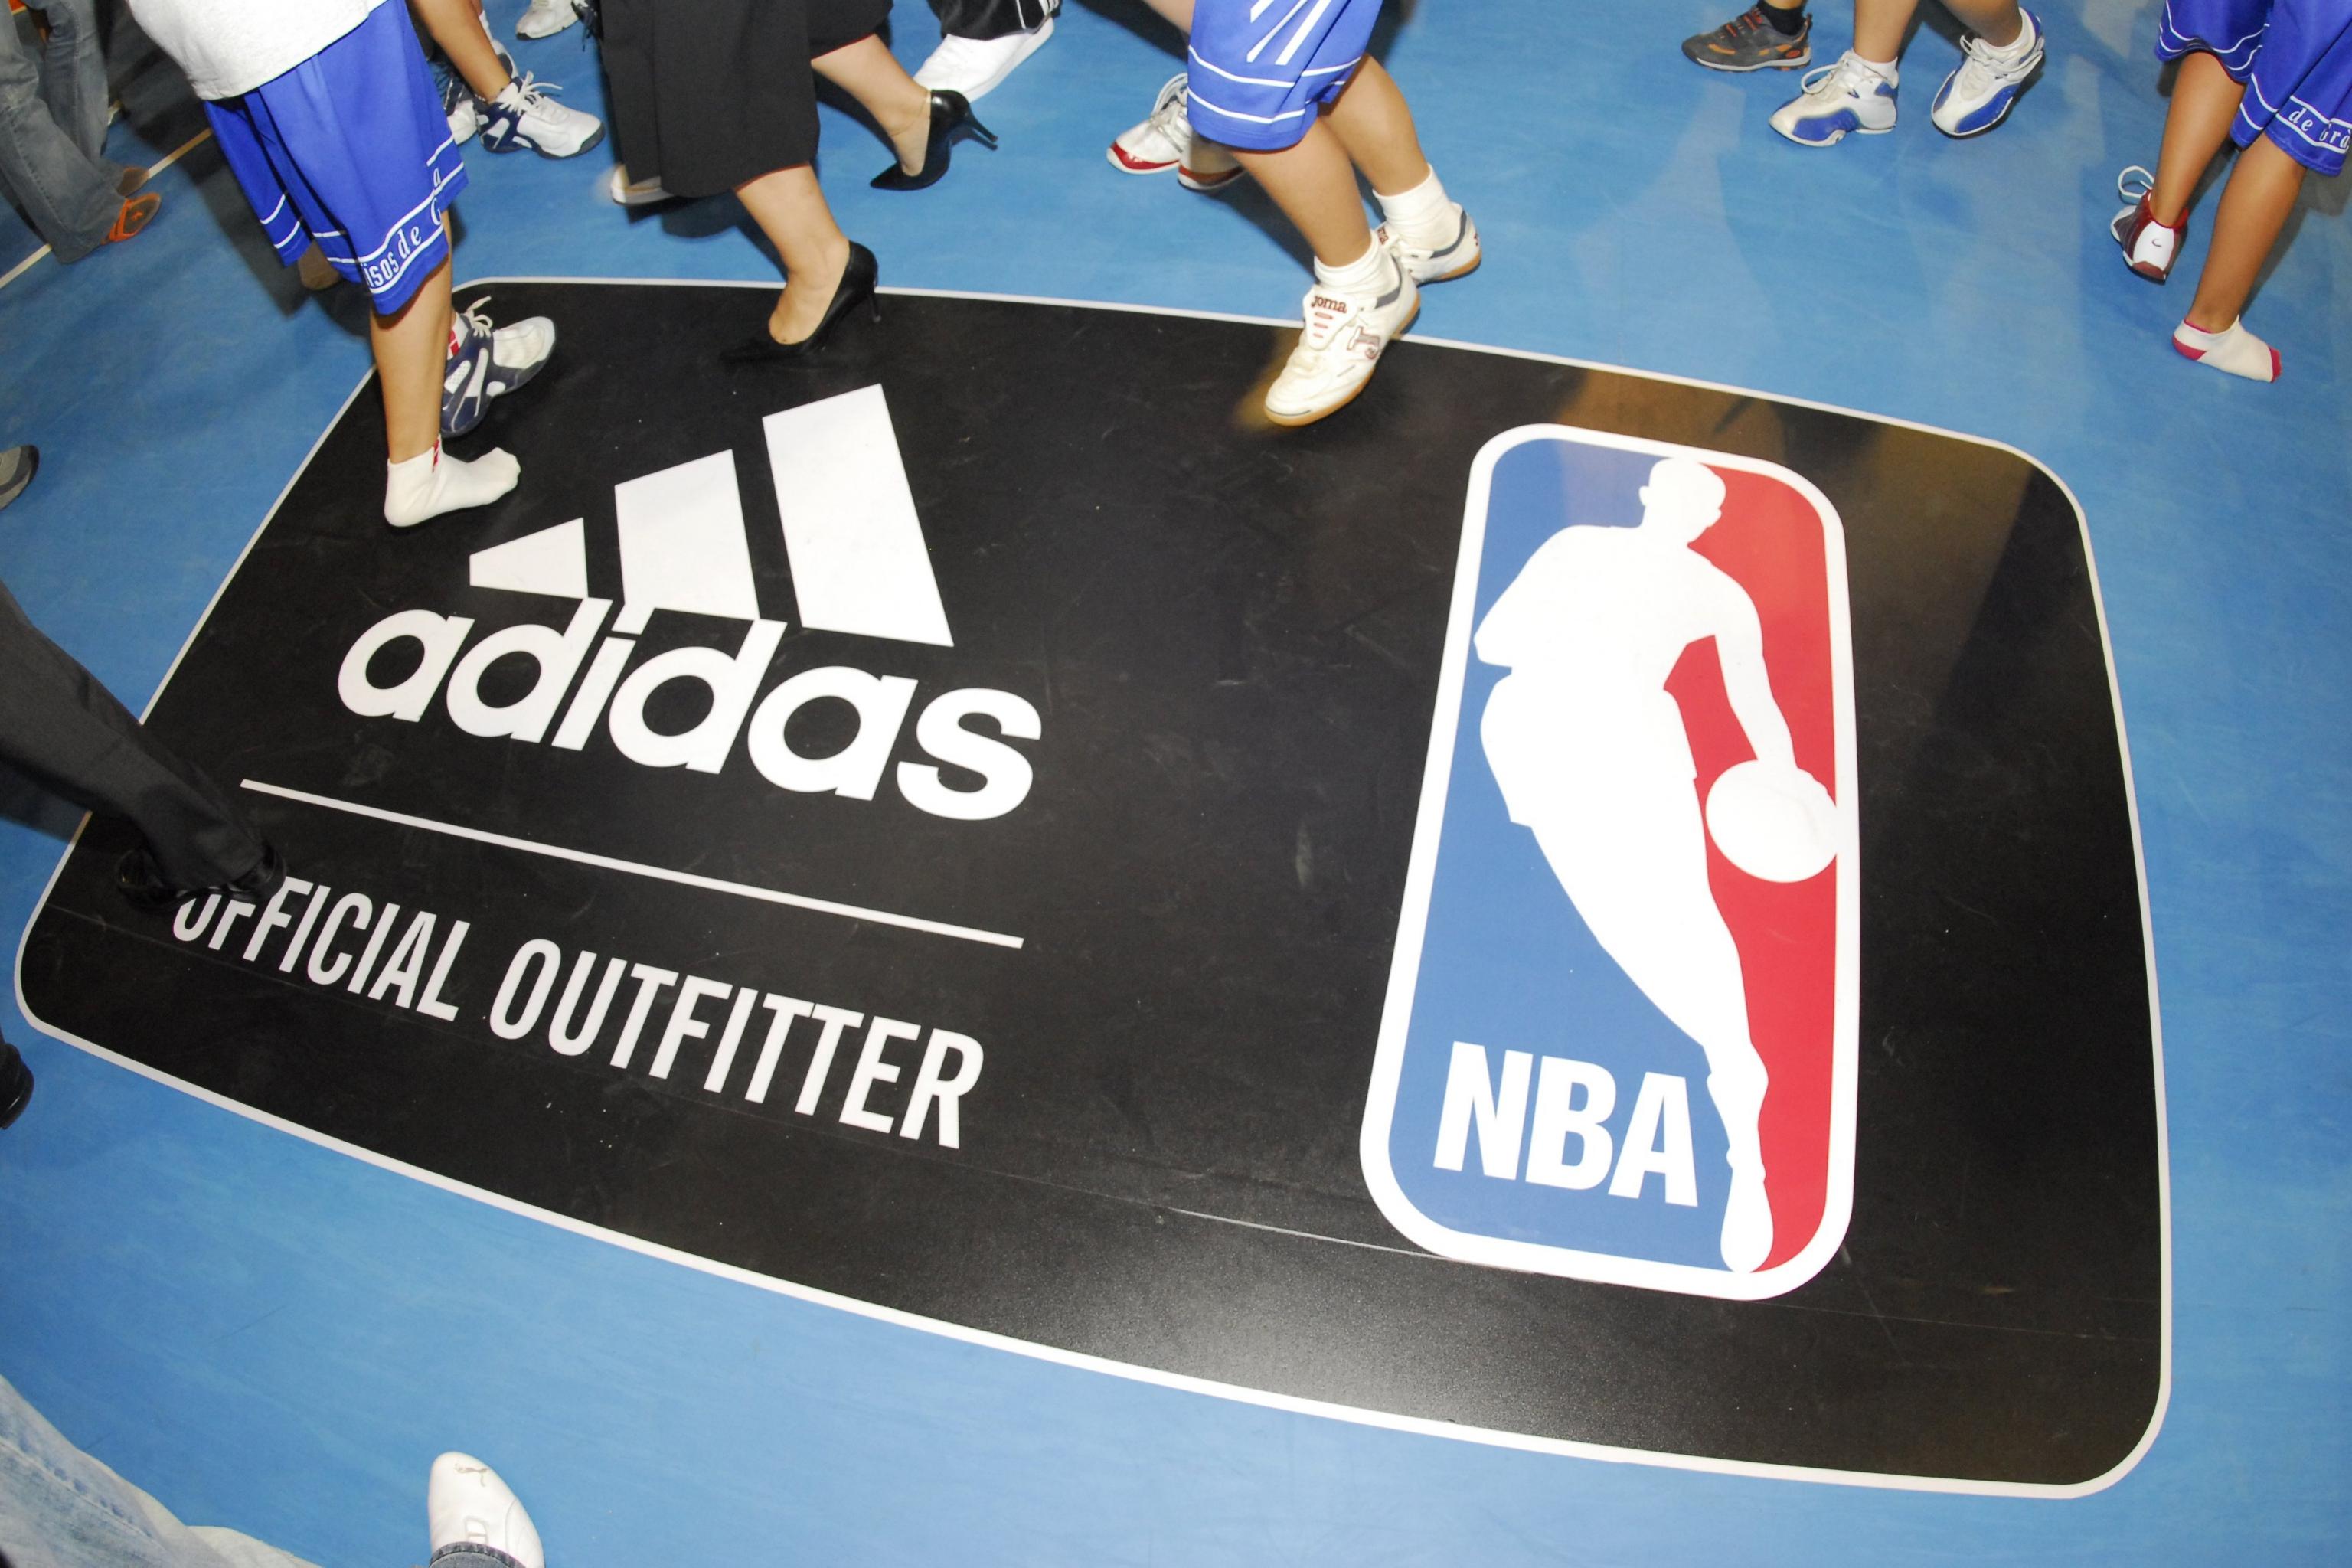 NBA's Contract with Adidas Will Not Be Renewed After 2016-17 Season | News, Scores, Stats, and Rumors | Report